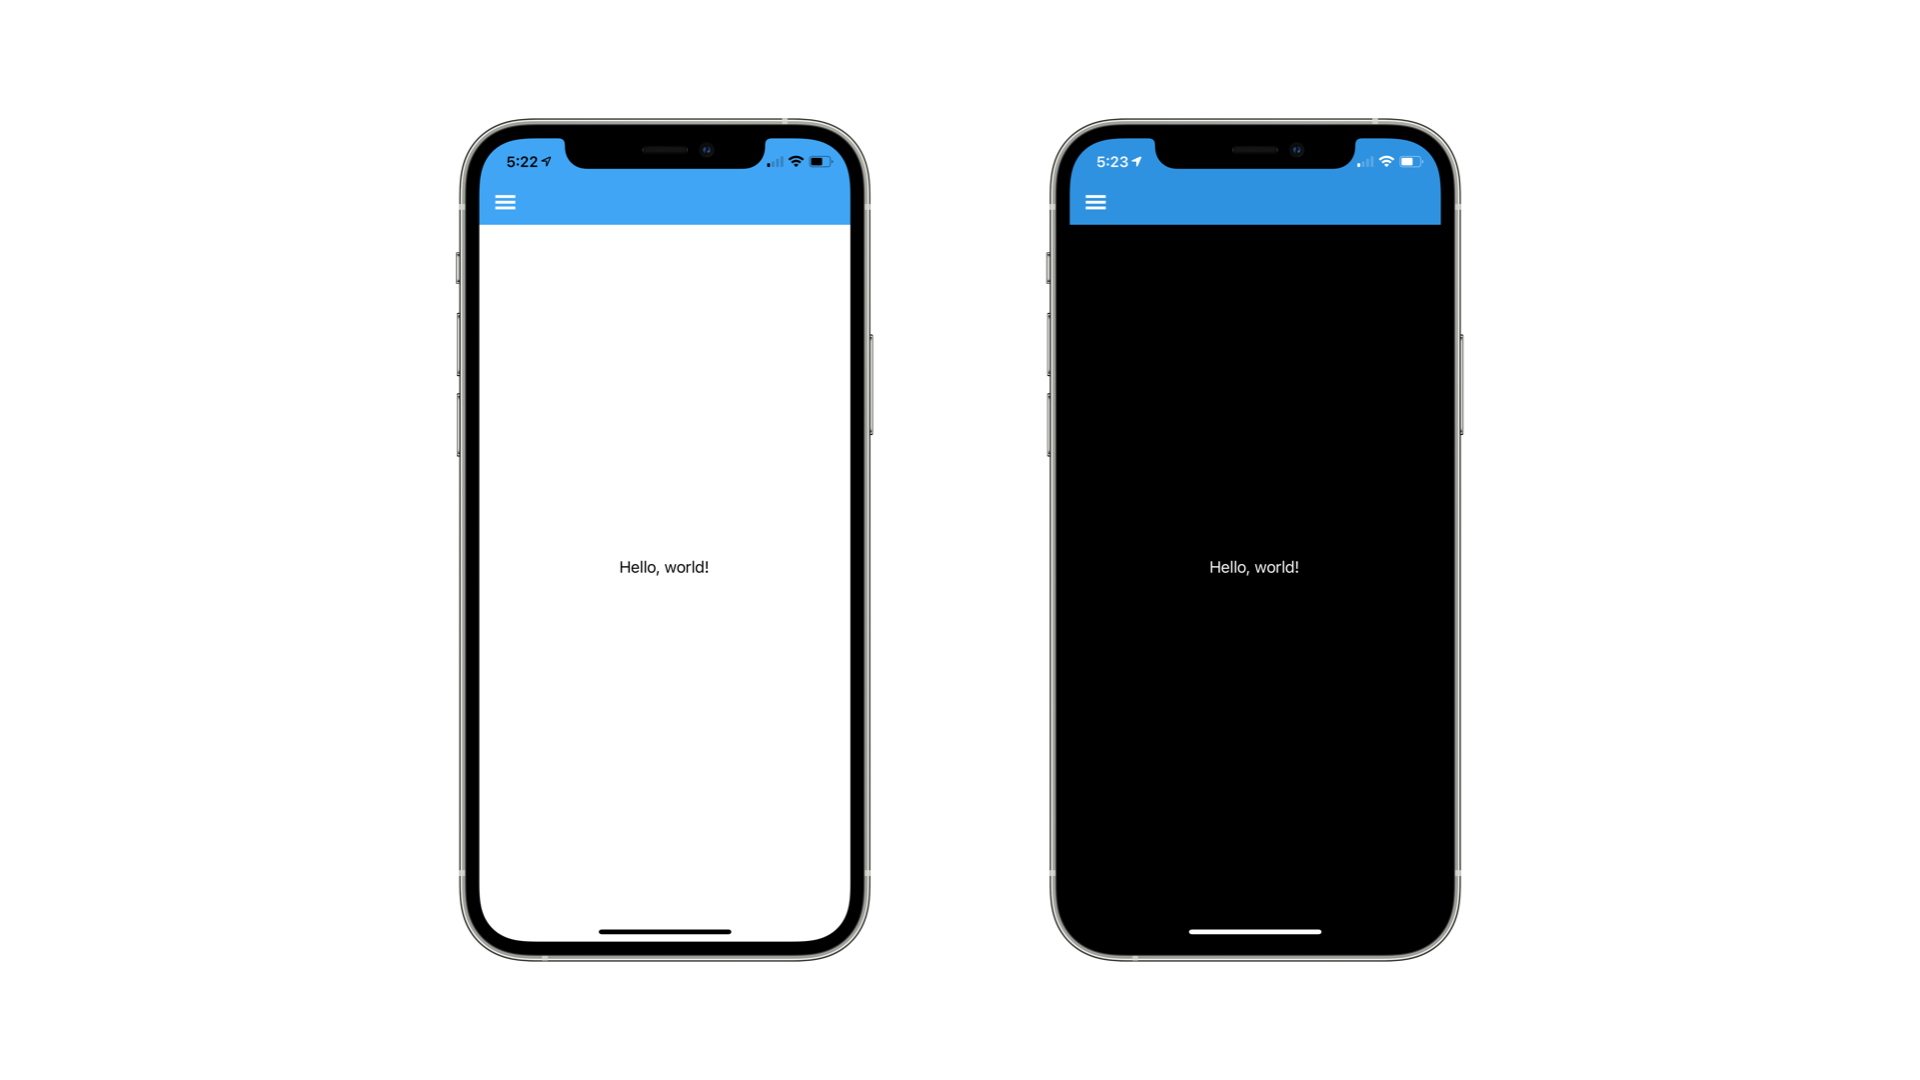 Two mobile screens with the text hello world, one with black background with white text and the other white background with black text